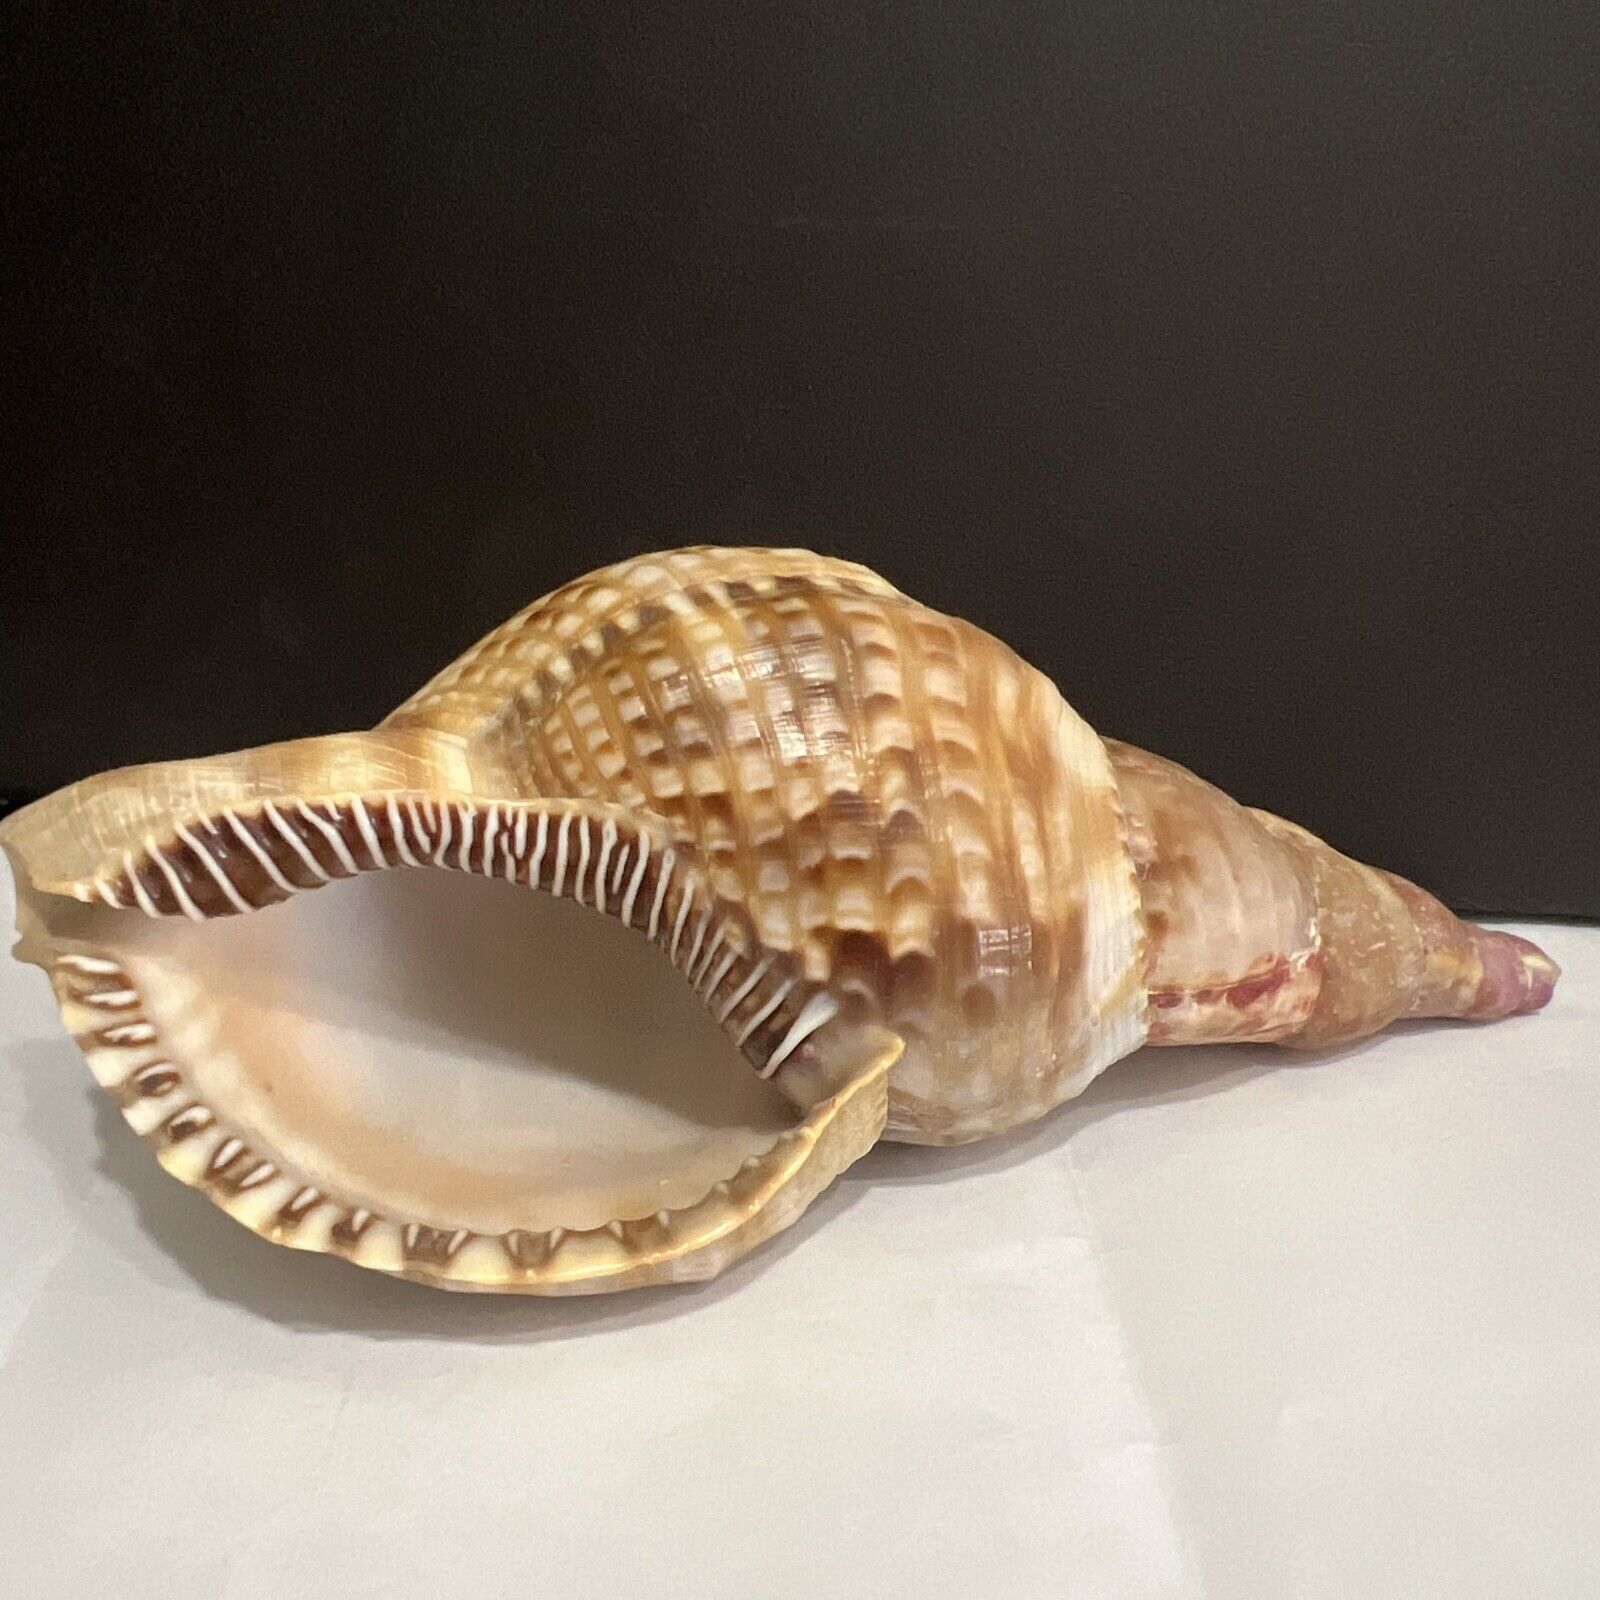 Triton Conch Seashell Trumpeted Shell, Beautiful Markings 7” Chip On End